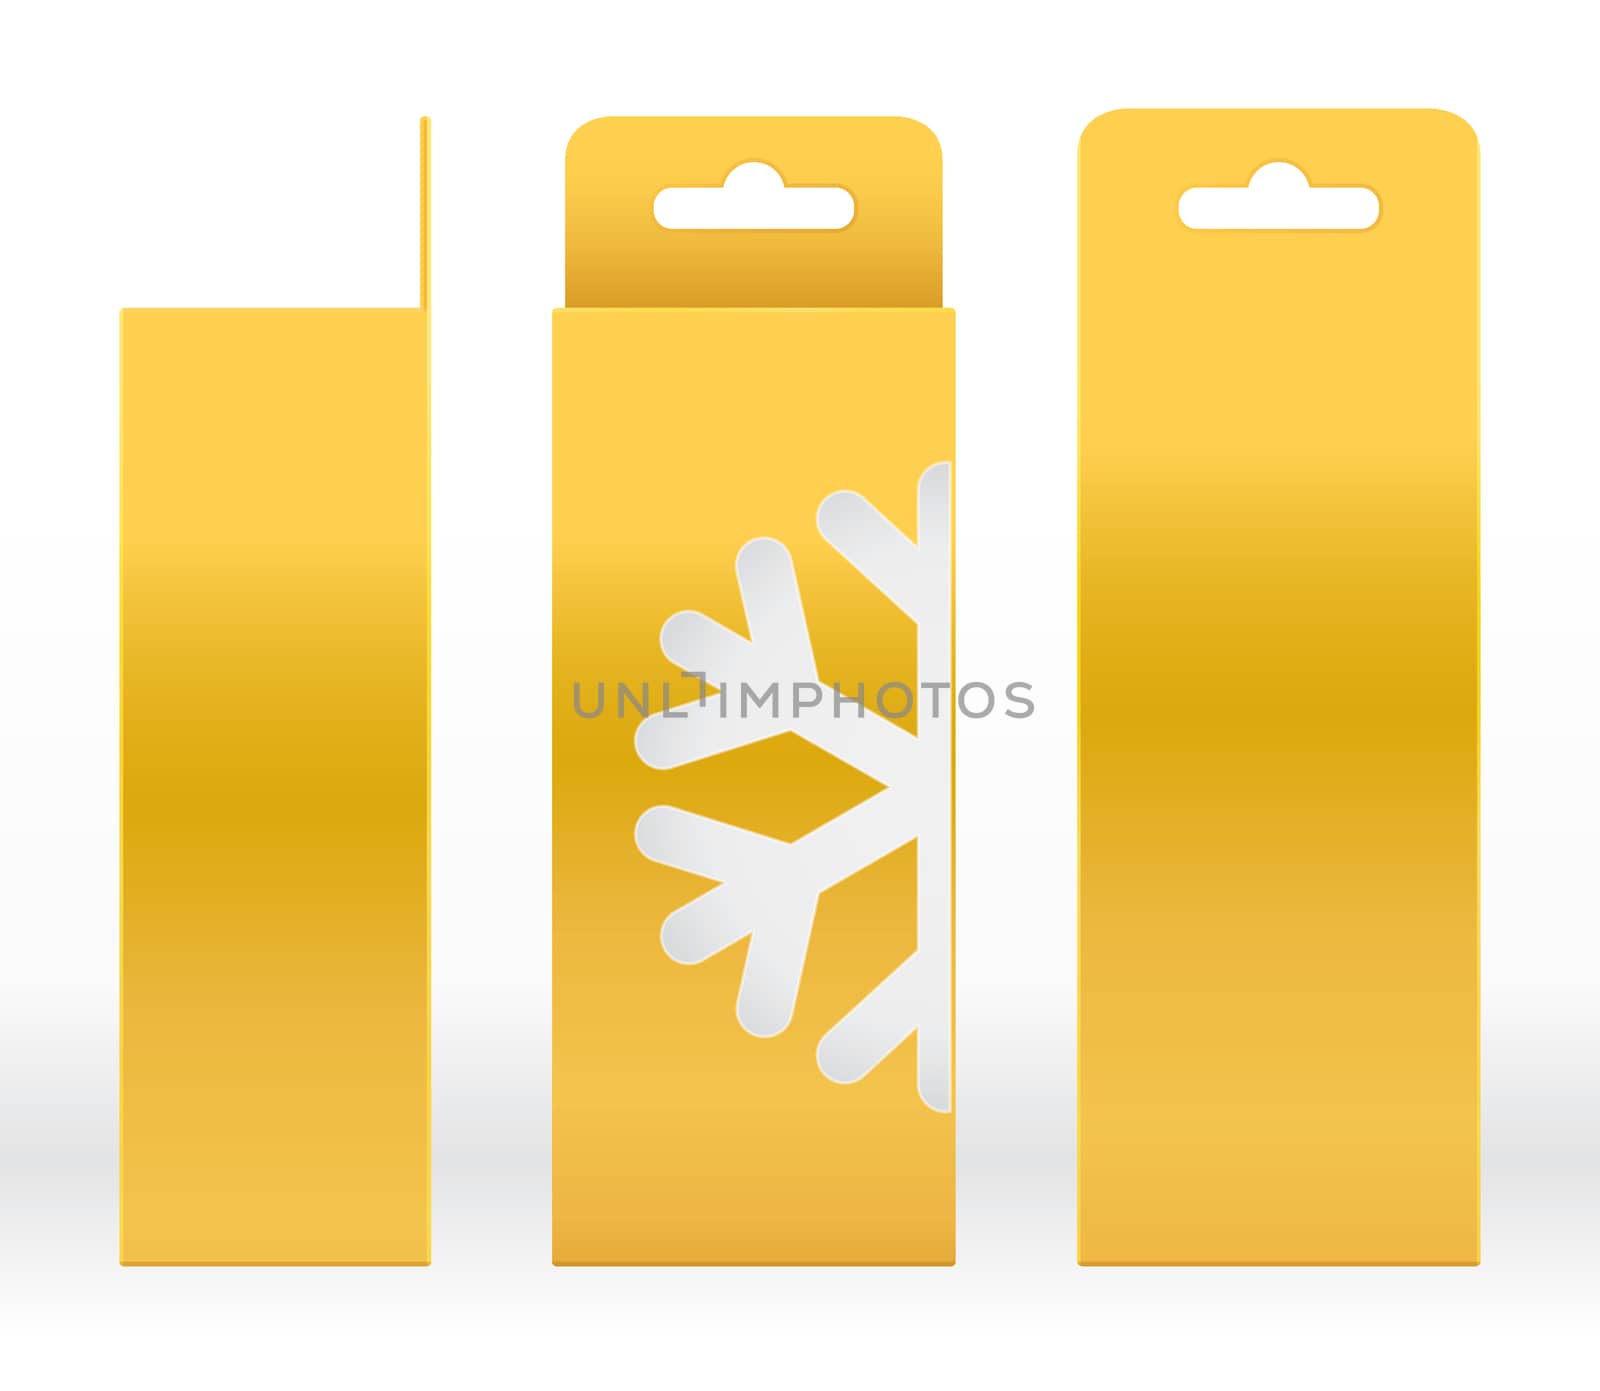 Hanging Box Gold window snow shape cut out Packaging Template blank. Luxury Empty Box Golden yellow Template for design product package gift box, Gold Box packaging paper kraft cardboard package